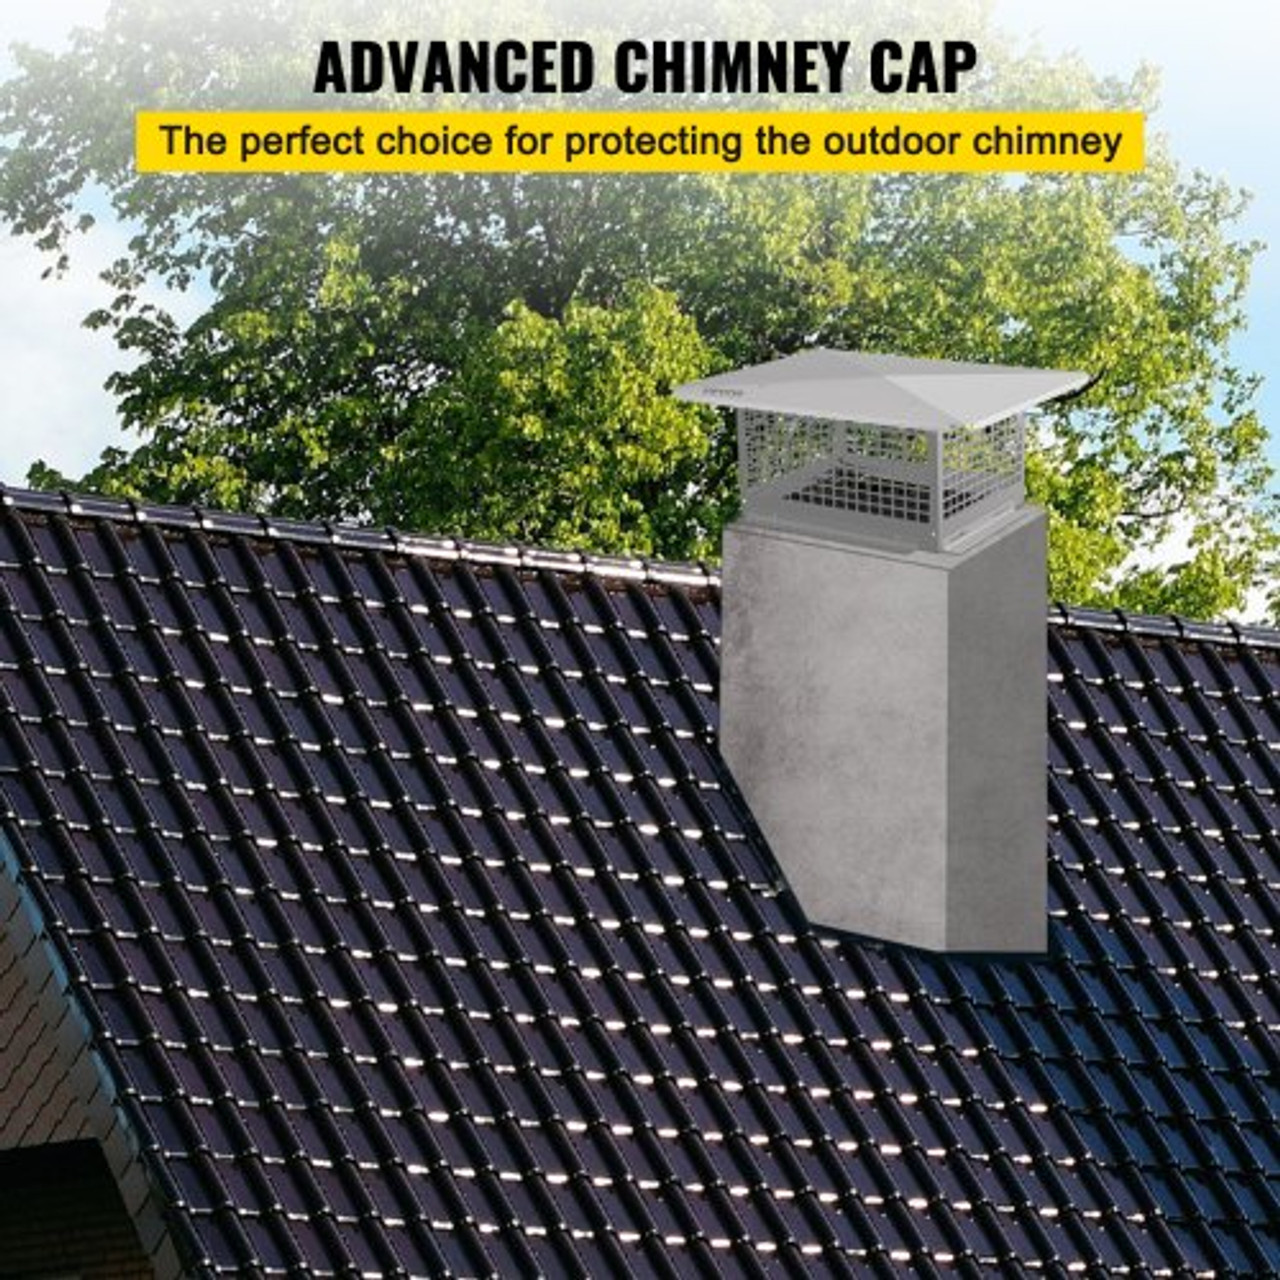 Chimney Cap, 13" x 21" Flue Caps, 304 Stainless Steel Fireplace Chimney Cover, Adjustable Metal Spark Arrestor with Bolts Screws, Mesh Chimney Flue Cover for Outside Existing Clay Flue Tile